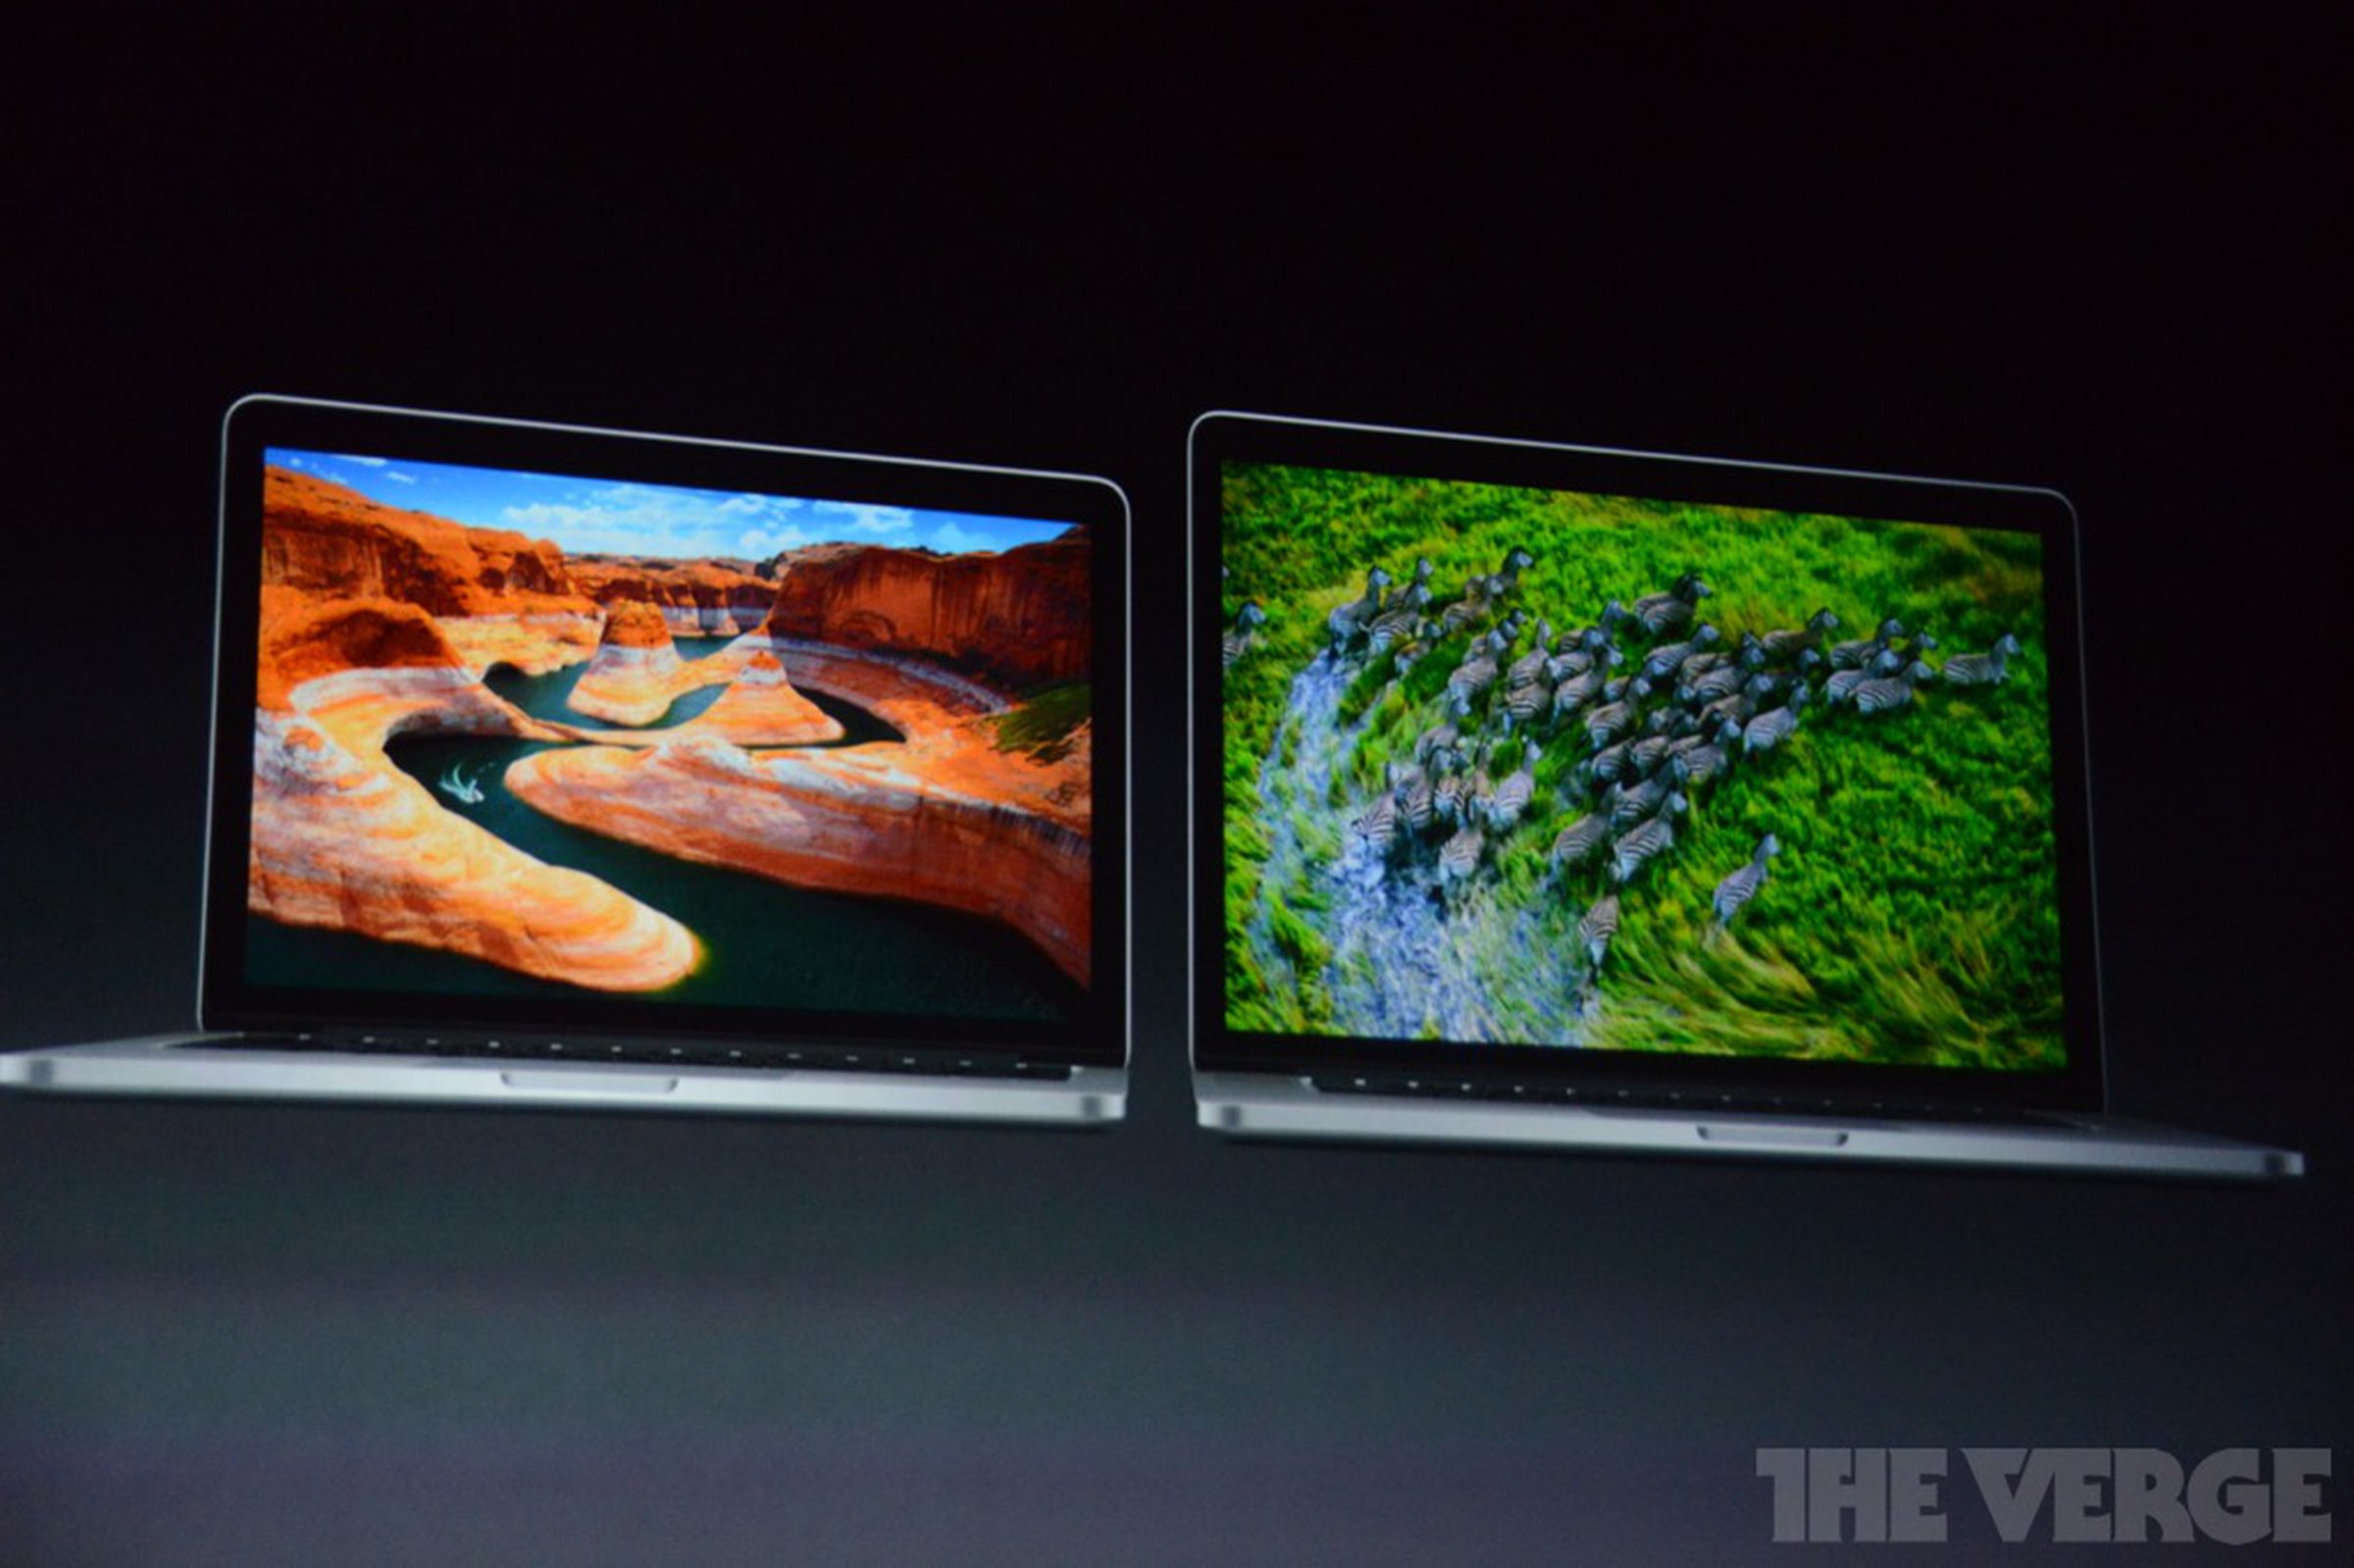 Photos of the new MacBook Pros with Retina Displays from Apple's fall 2013 event